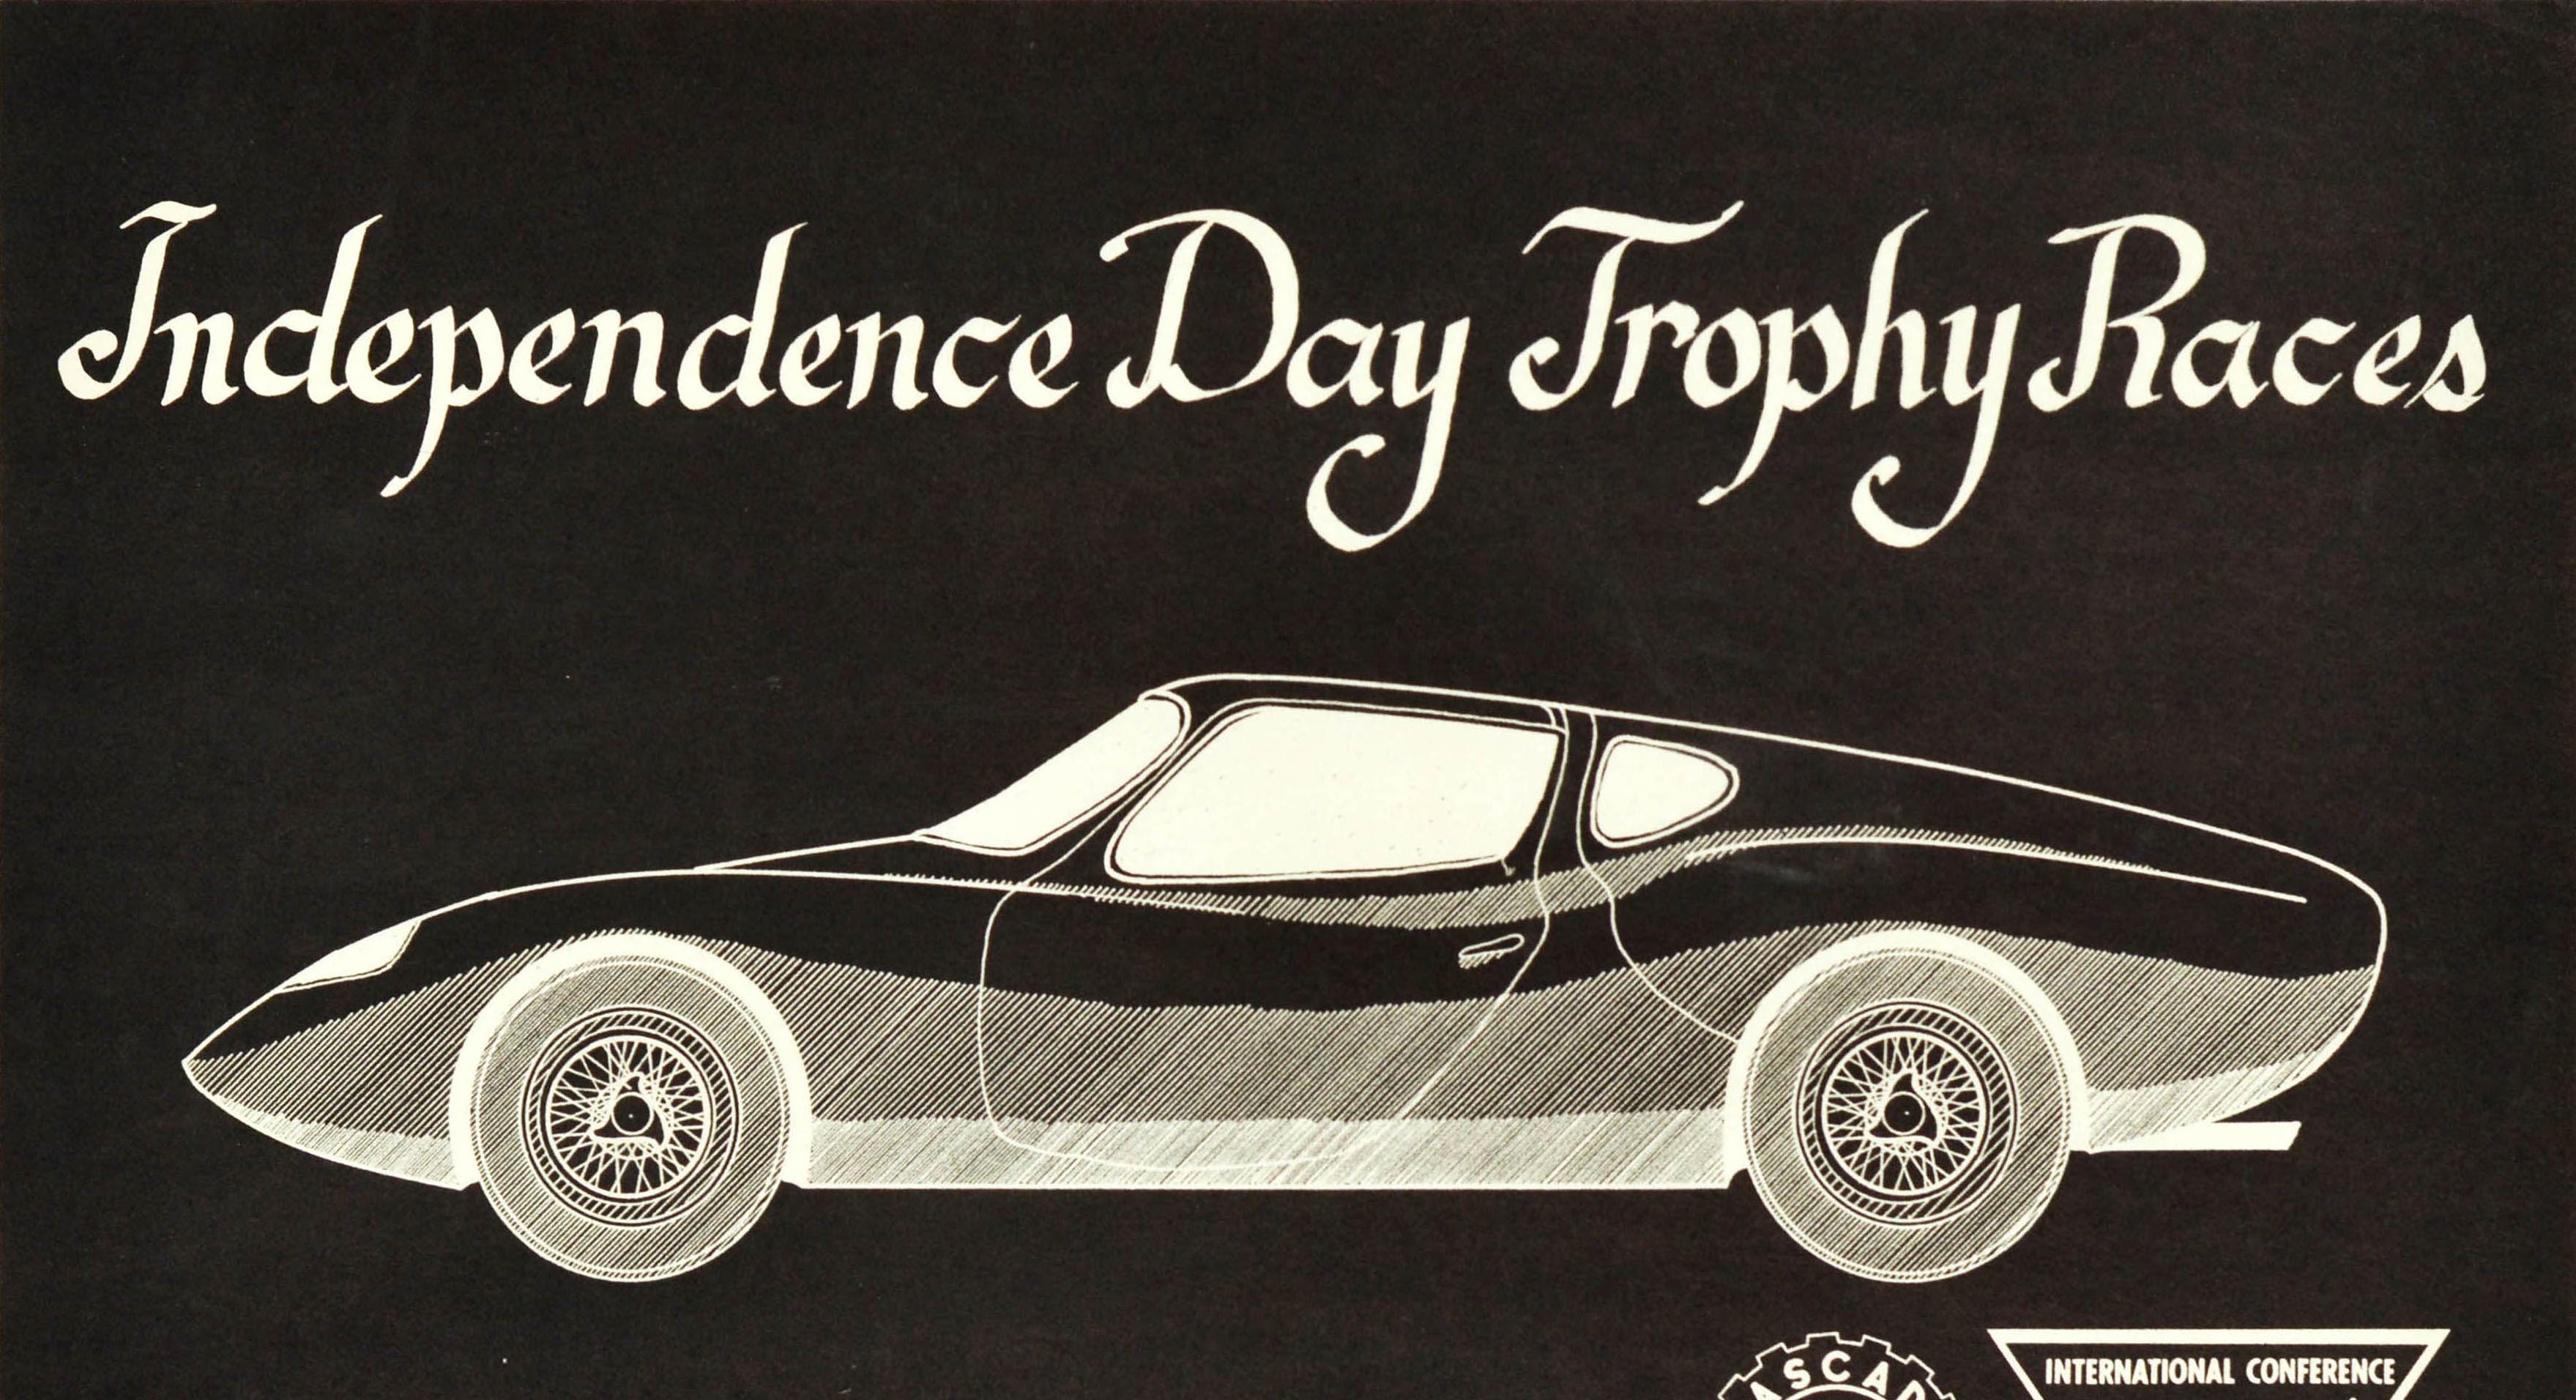 Original vintage motorsport poster for a championship event Independence Day Trophy Races held on 3-4 July 1965 at West Delta Park in Portland Oregon featuring an image of a racing car with the title text above and logos of the Cascade Sports Car